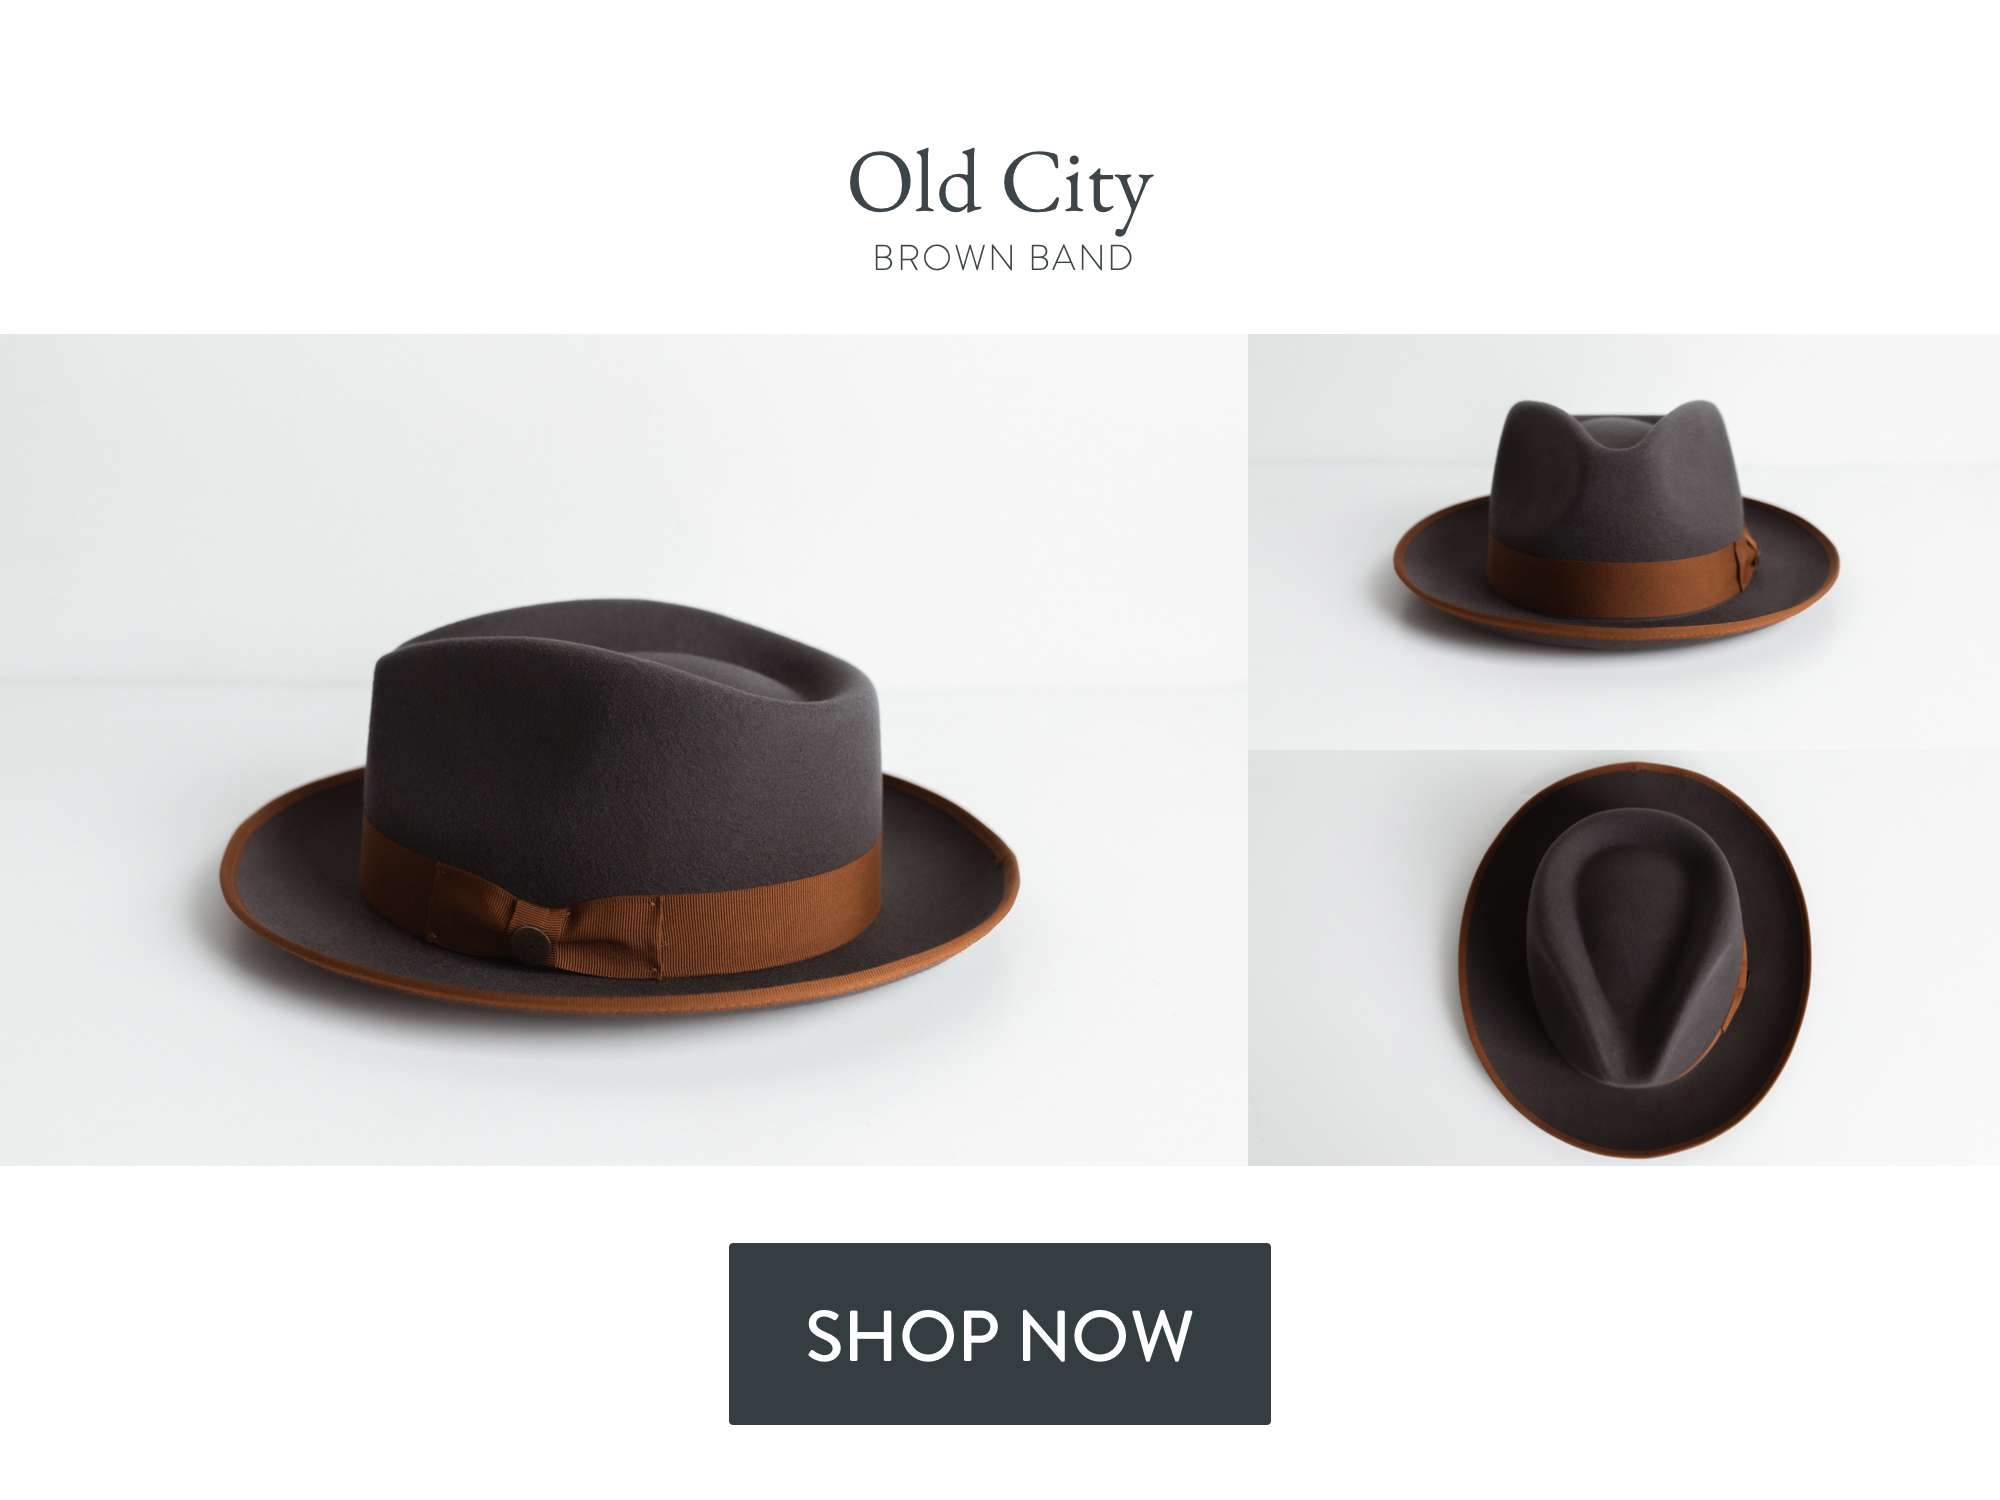 Featured hat: Two Roads Old City, Brown Band